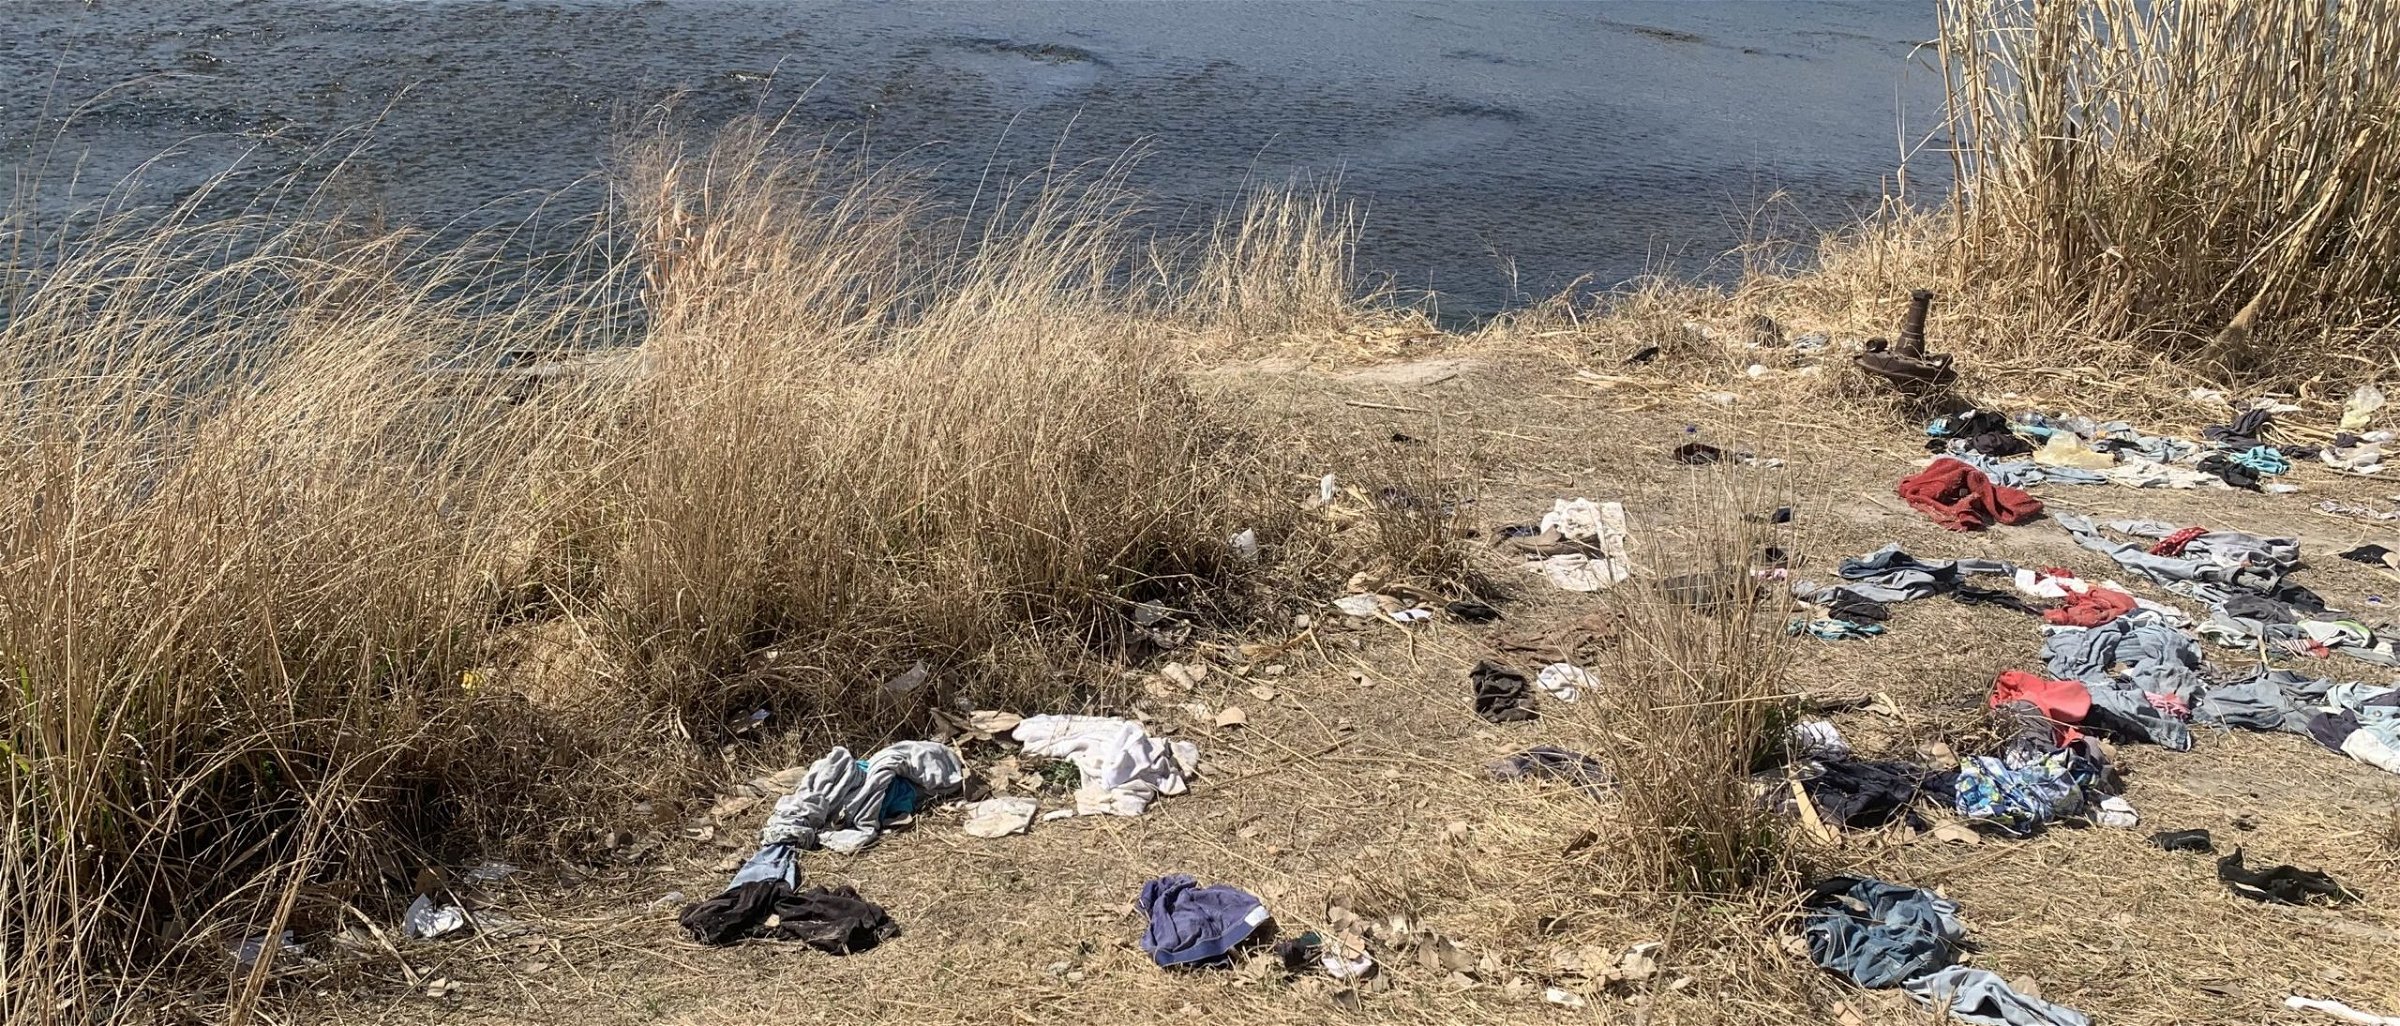 Wet clothes sit along the river where migrants have crossed from Mexico into Del Rio, Texas (Jennie Taer//Daily caller News Foundation)